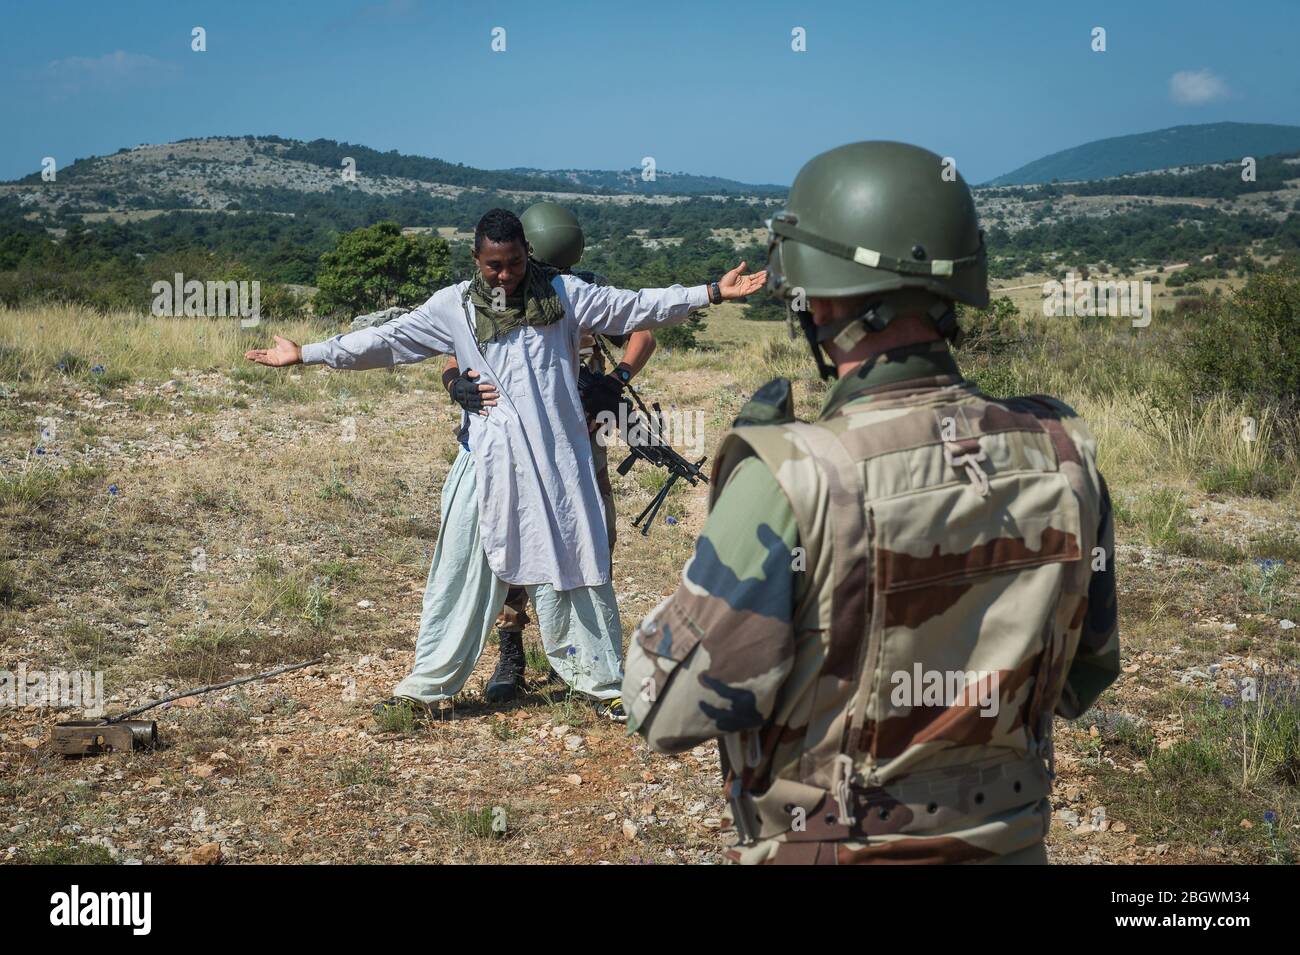 DRAGUIGNAN, FRANCE - JULY 21: a man getting arrested during a simulation of conflict between soldiers and terorists with fake corpses, fake terrorists Stock Photo